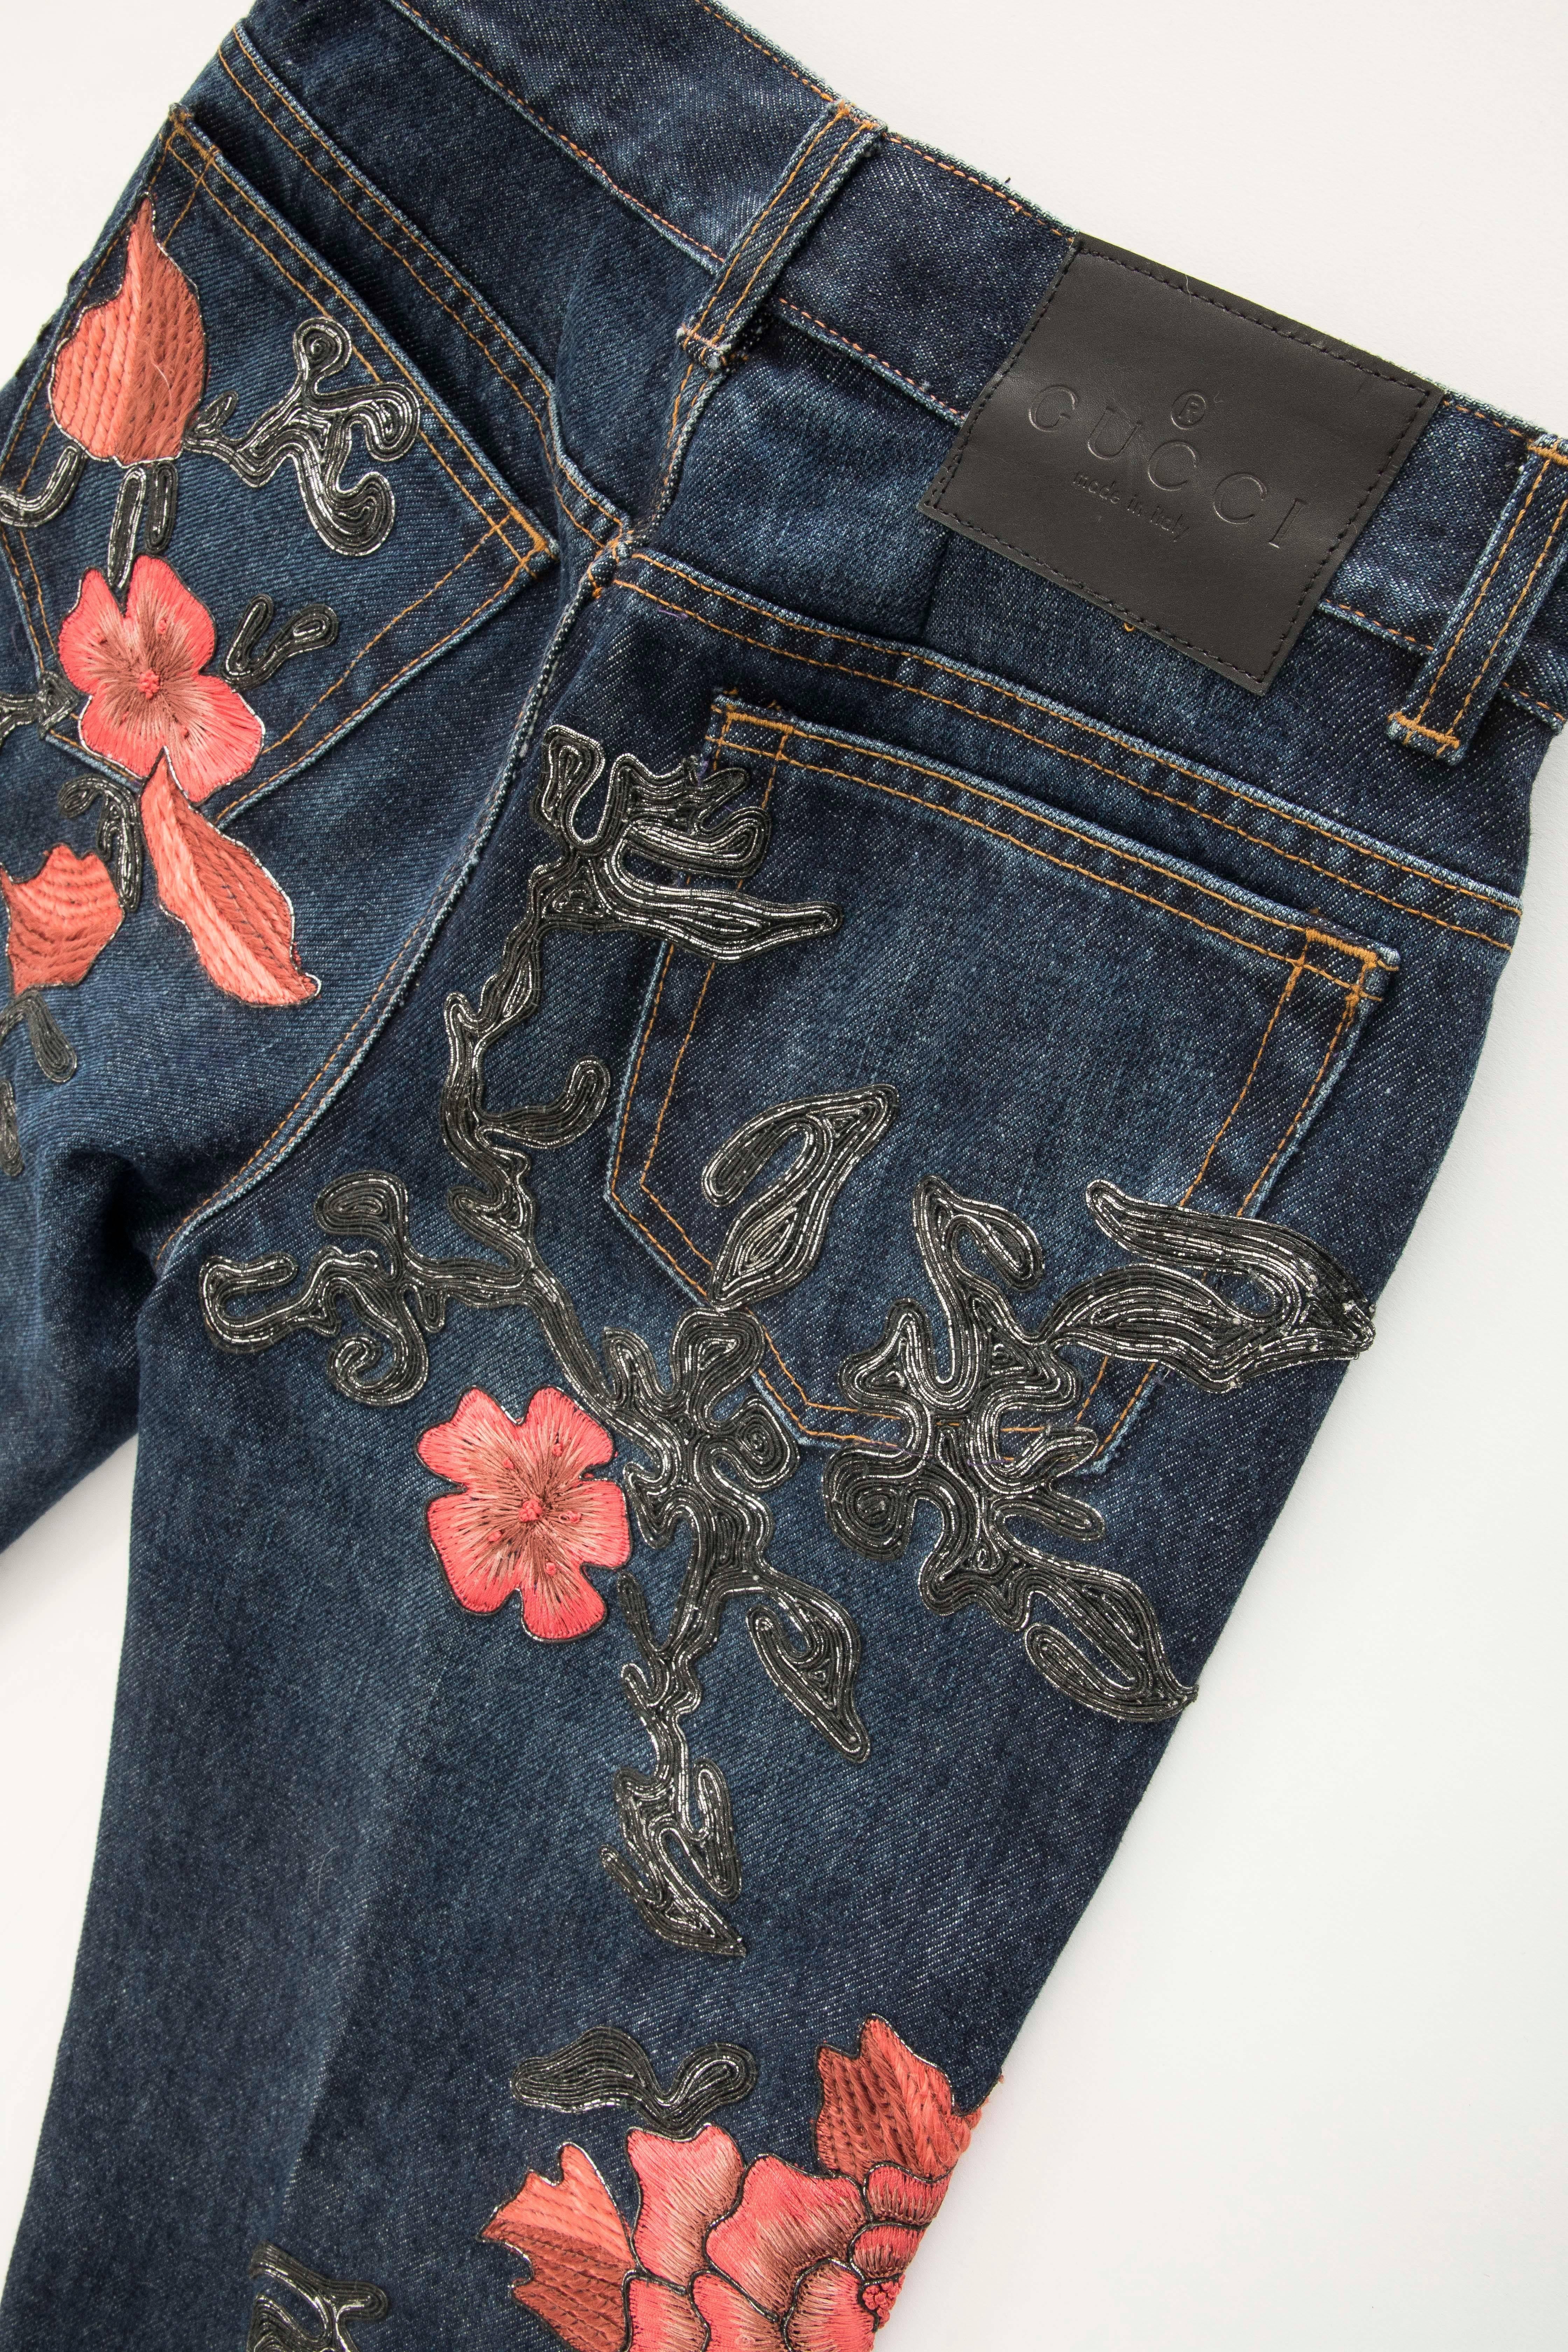 Tom Ford for Gucci Runway Men's Floral Embroidered Denim Jeans, Fall, 1999 In Excellent Condition For Sale In Cincinnati, OH